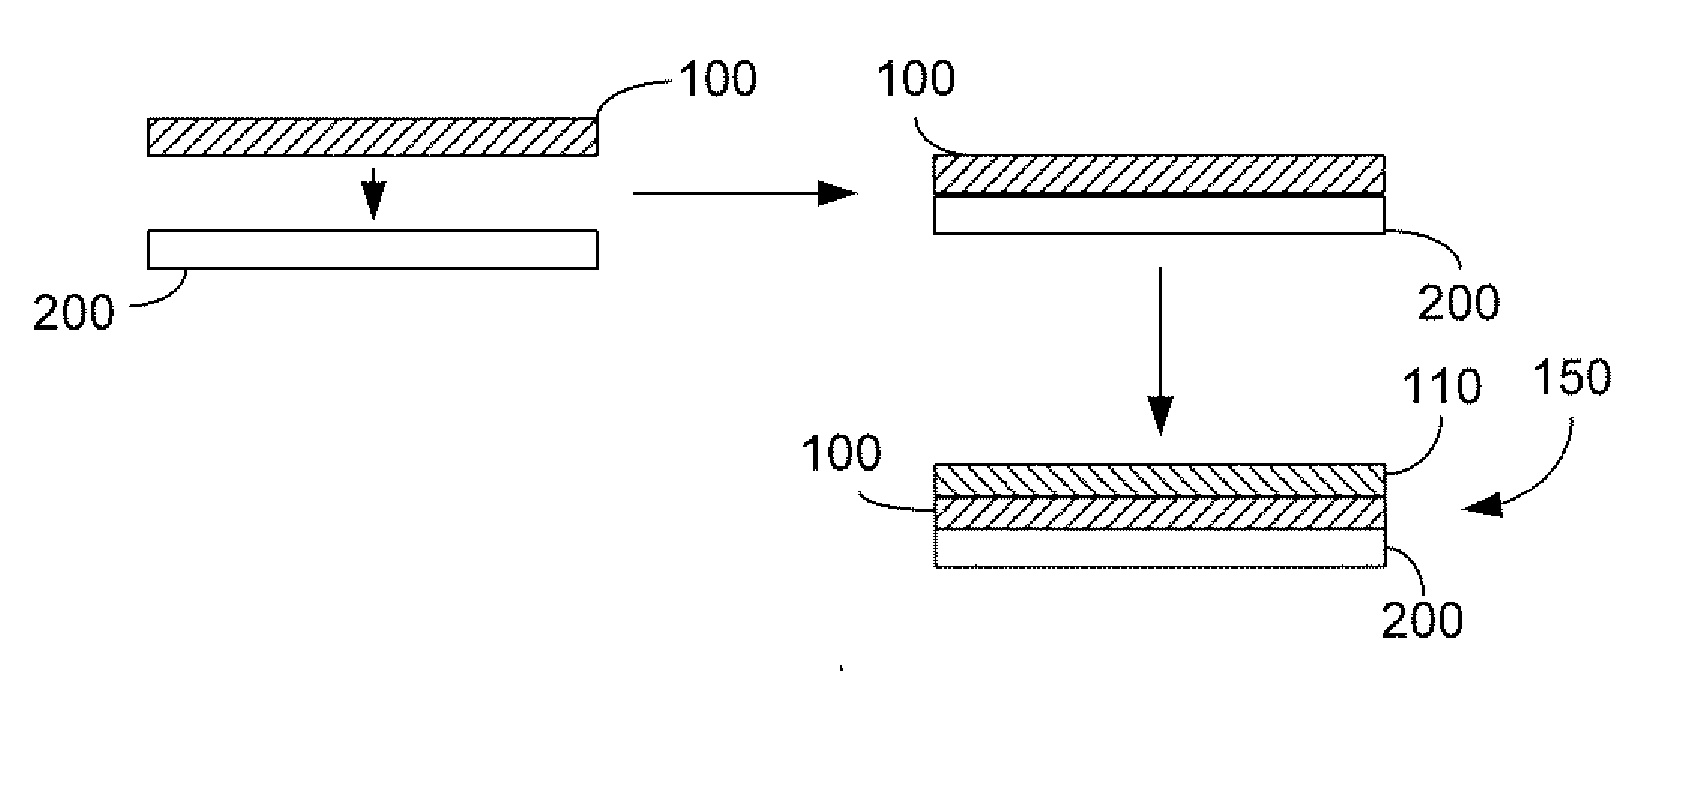 Electromagnetic Interference Shielding Structure Including Carbon Nanotubes and Nanofibers